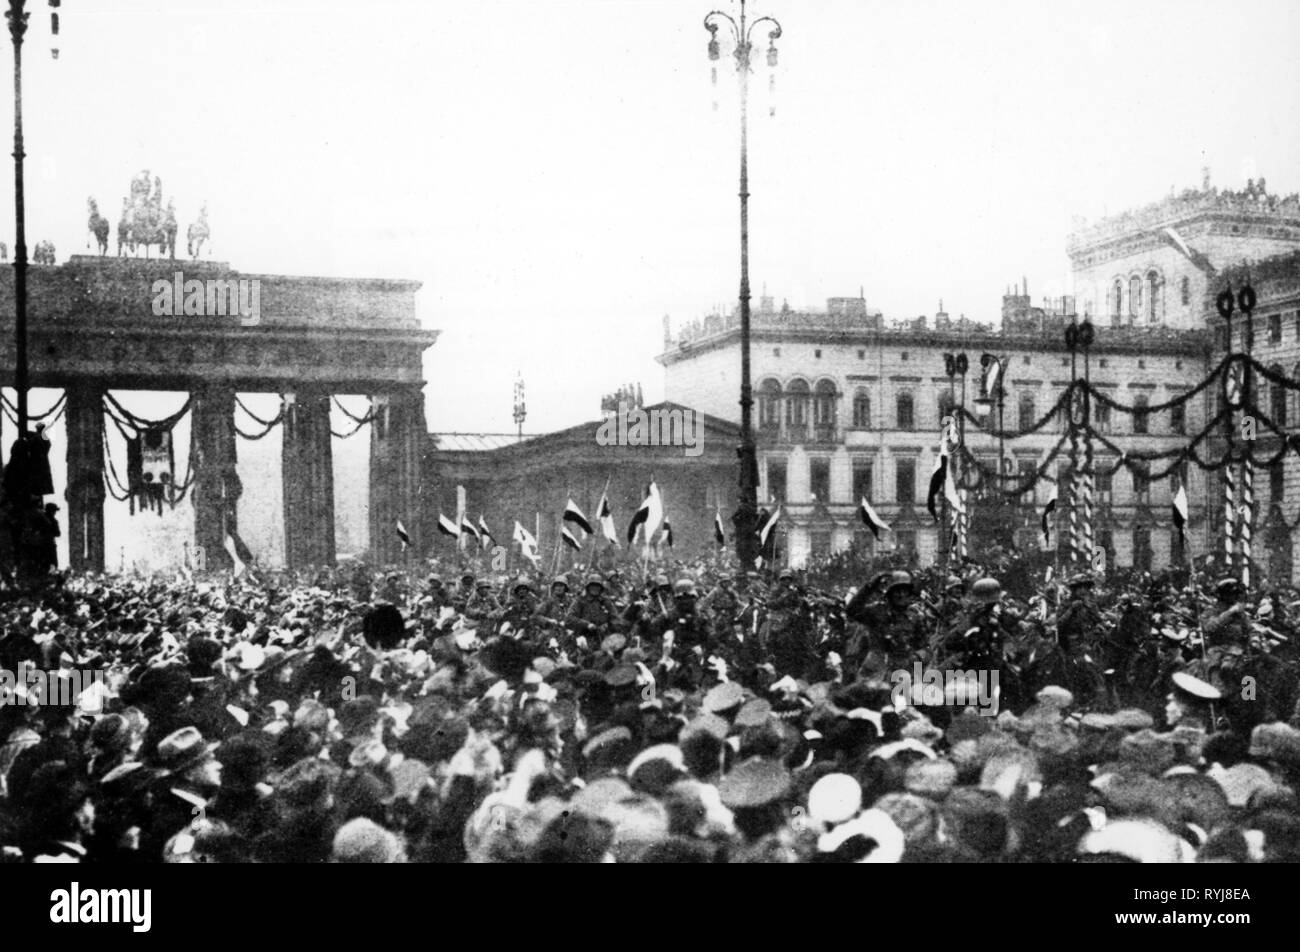 First World War / WWI, Germany, demobilization of the German army, a regiment Prussian cavalry is marching across the Pariser Platz in Berlin, December 1918, Additional-Rights-Clearance-Info-Not-Available Stock Photo